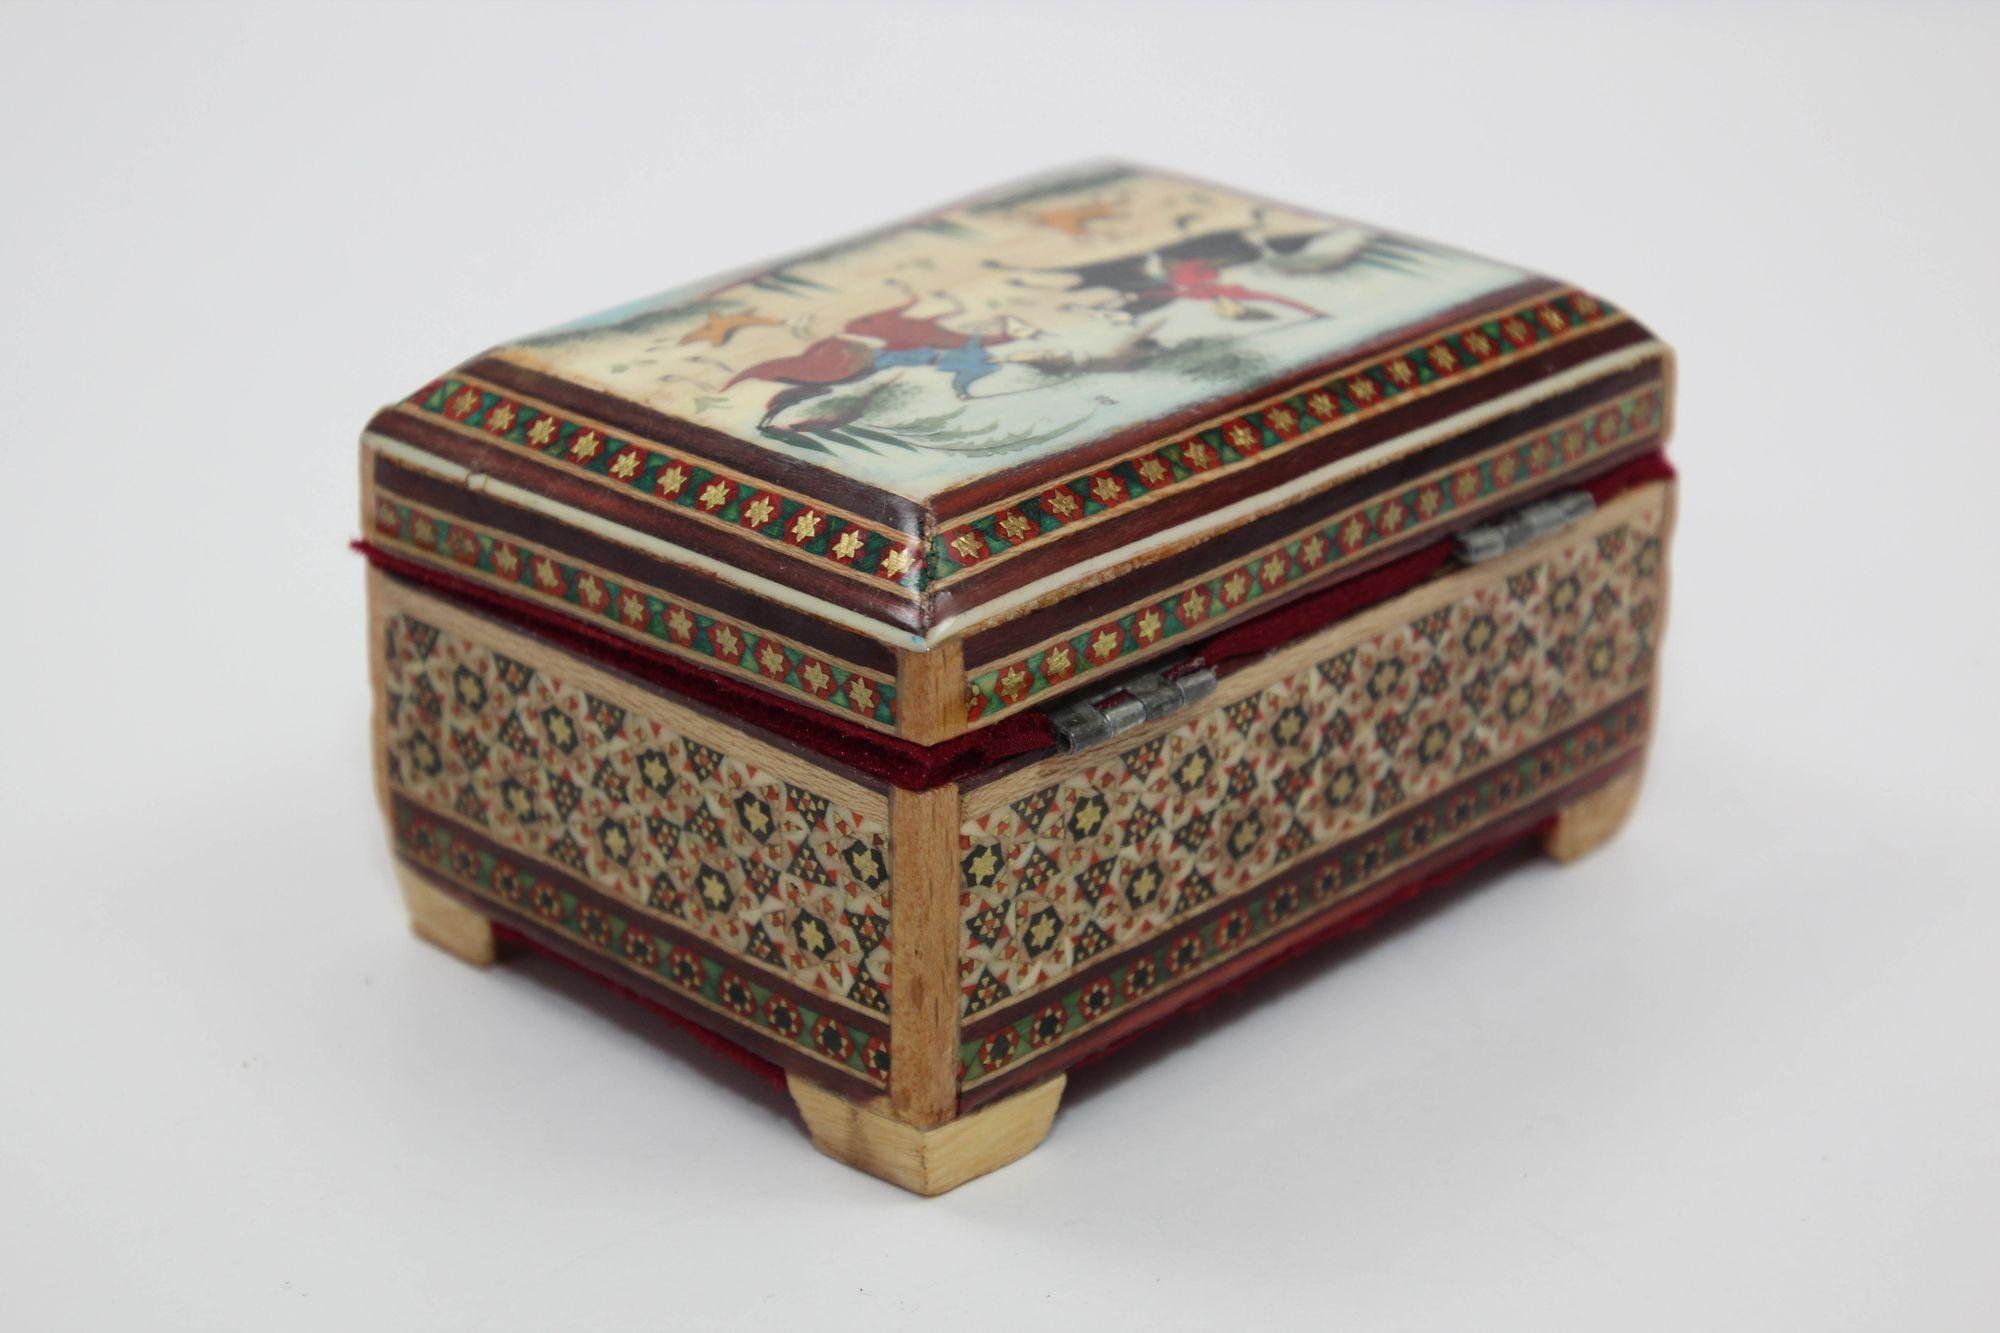 Vintage Middle Eastern Persian Khatam Trinket Box with Miniature Art Painting.
This hand-painted, lacquered wooden box features Moorish micro mosaic marquetry, perfect for holding small trinkets.
The vintage marquetry, a blend of wood inlay and